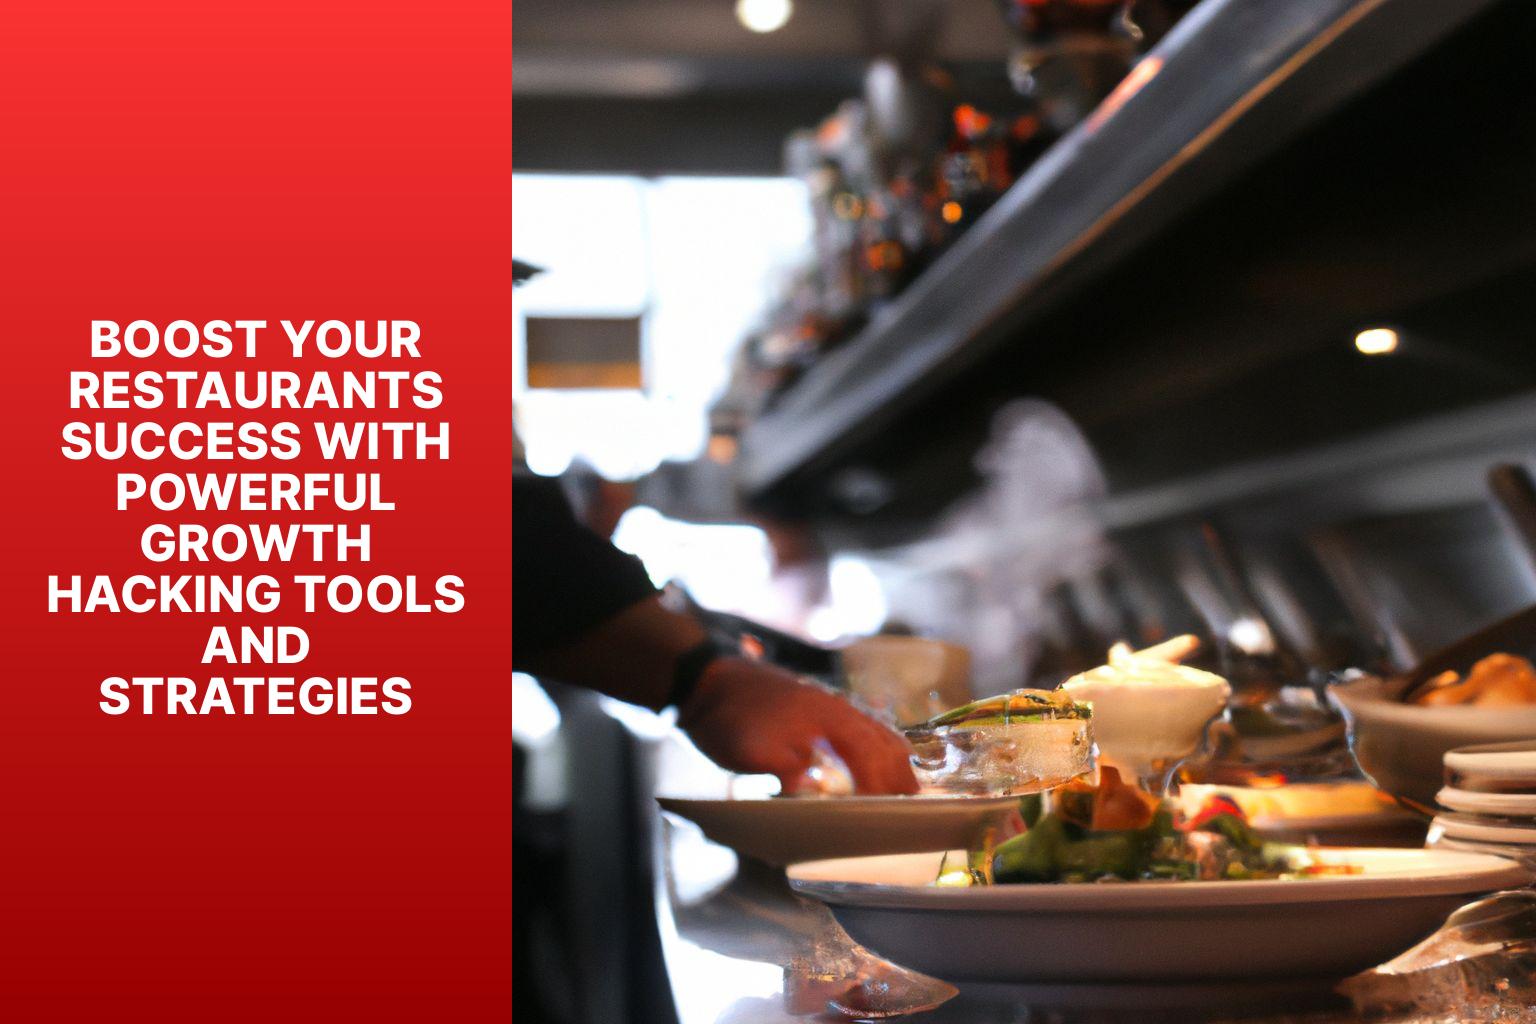 Boost Your Restaurants Success with Powerful Growth Hacking Tools and Strategies